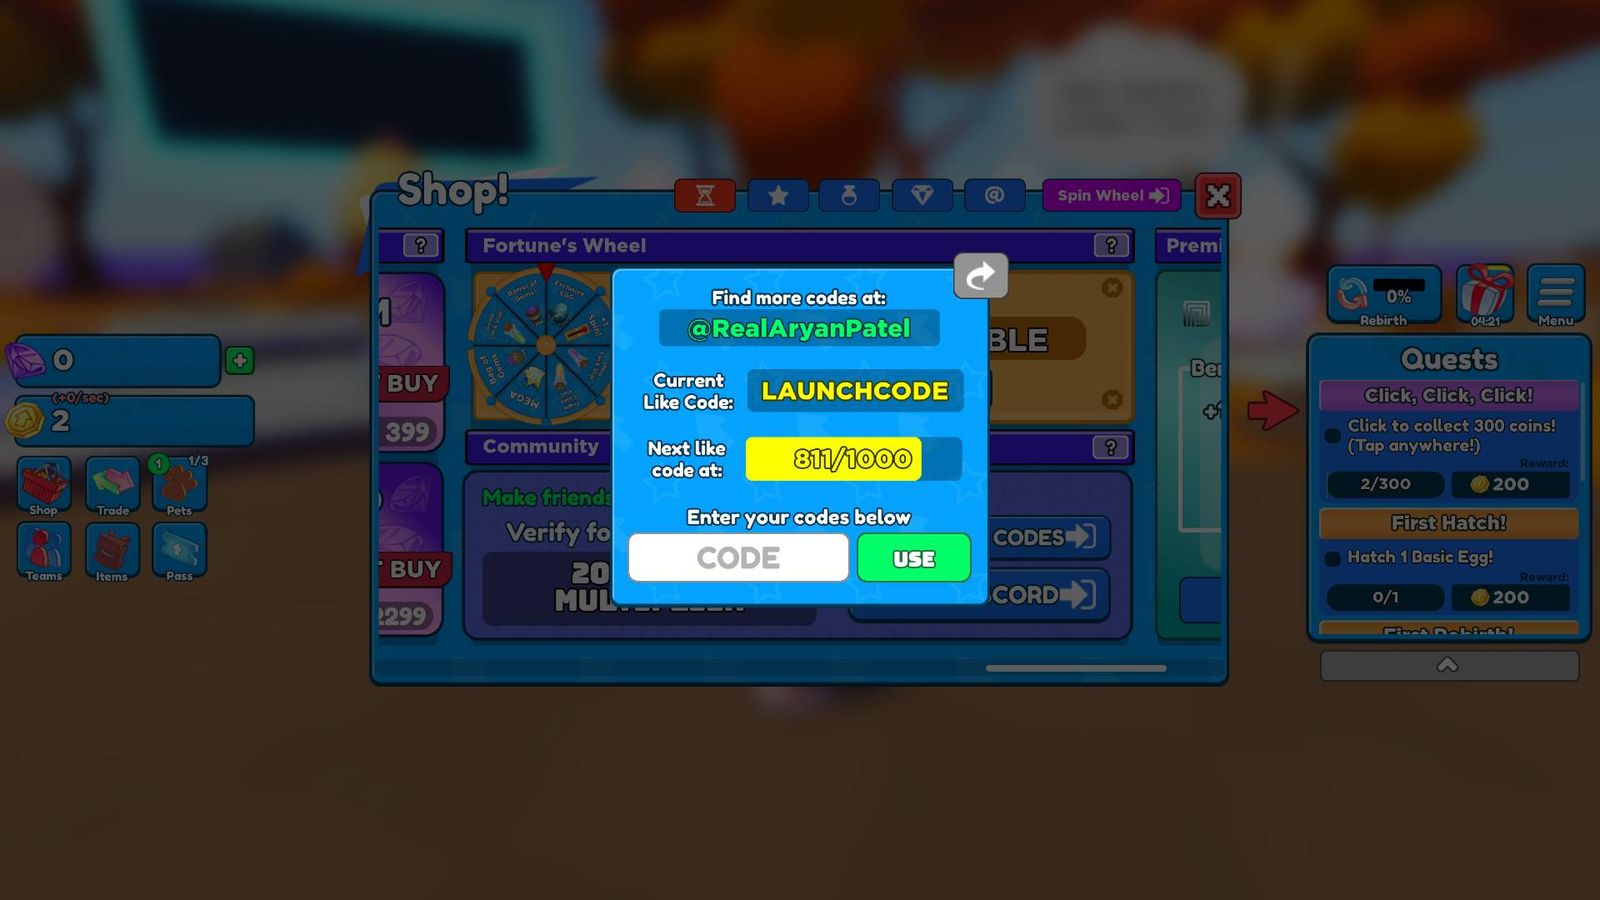 The code redemption screen in Click Simulator.